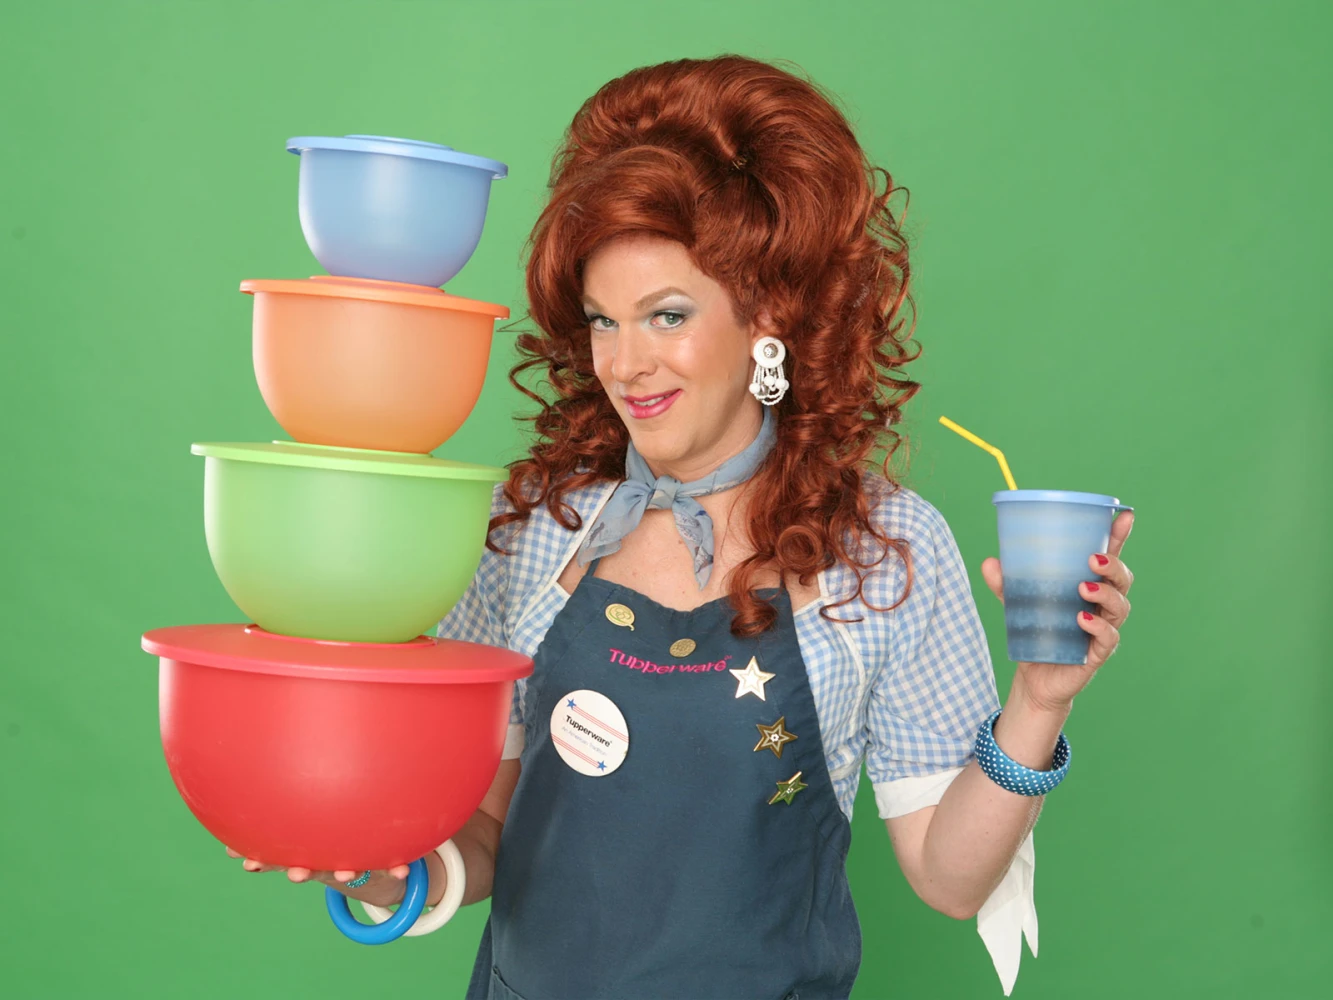 Dixie's Tupperware Party: What to expect - 1